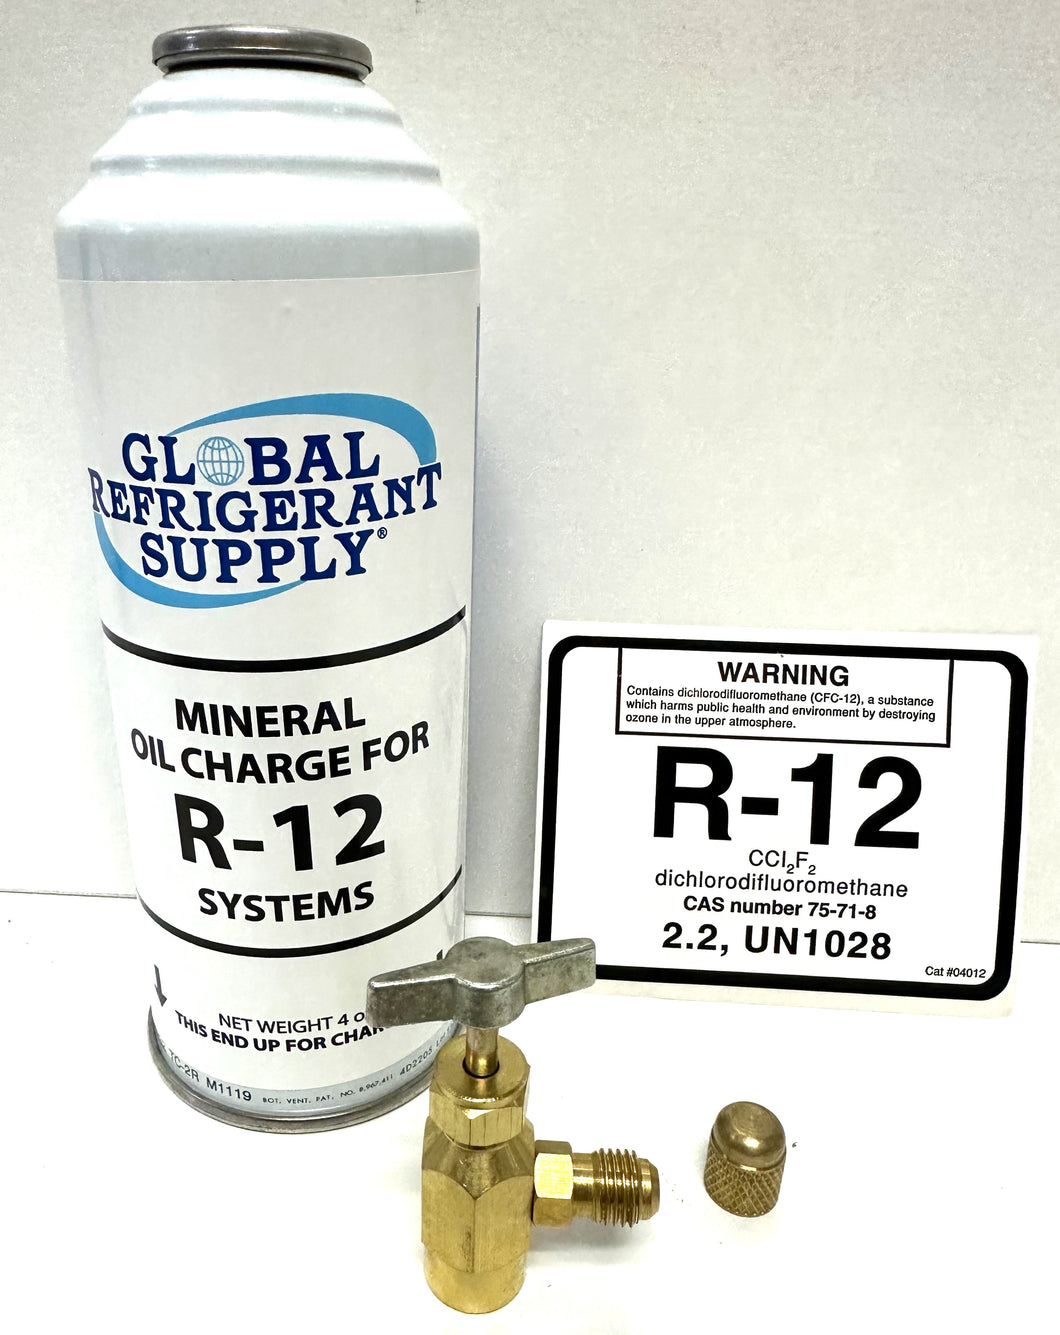 R12, Mineral Oil Charge, 4 oz. Can, Mineral Oil, For R-12 System K28 Can Taper